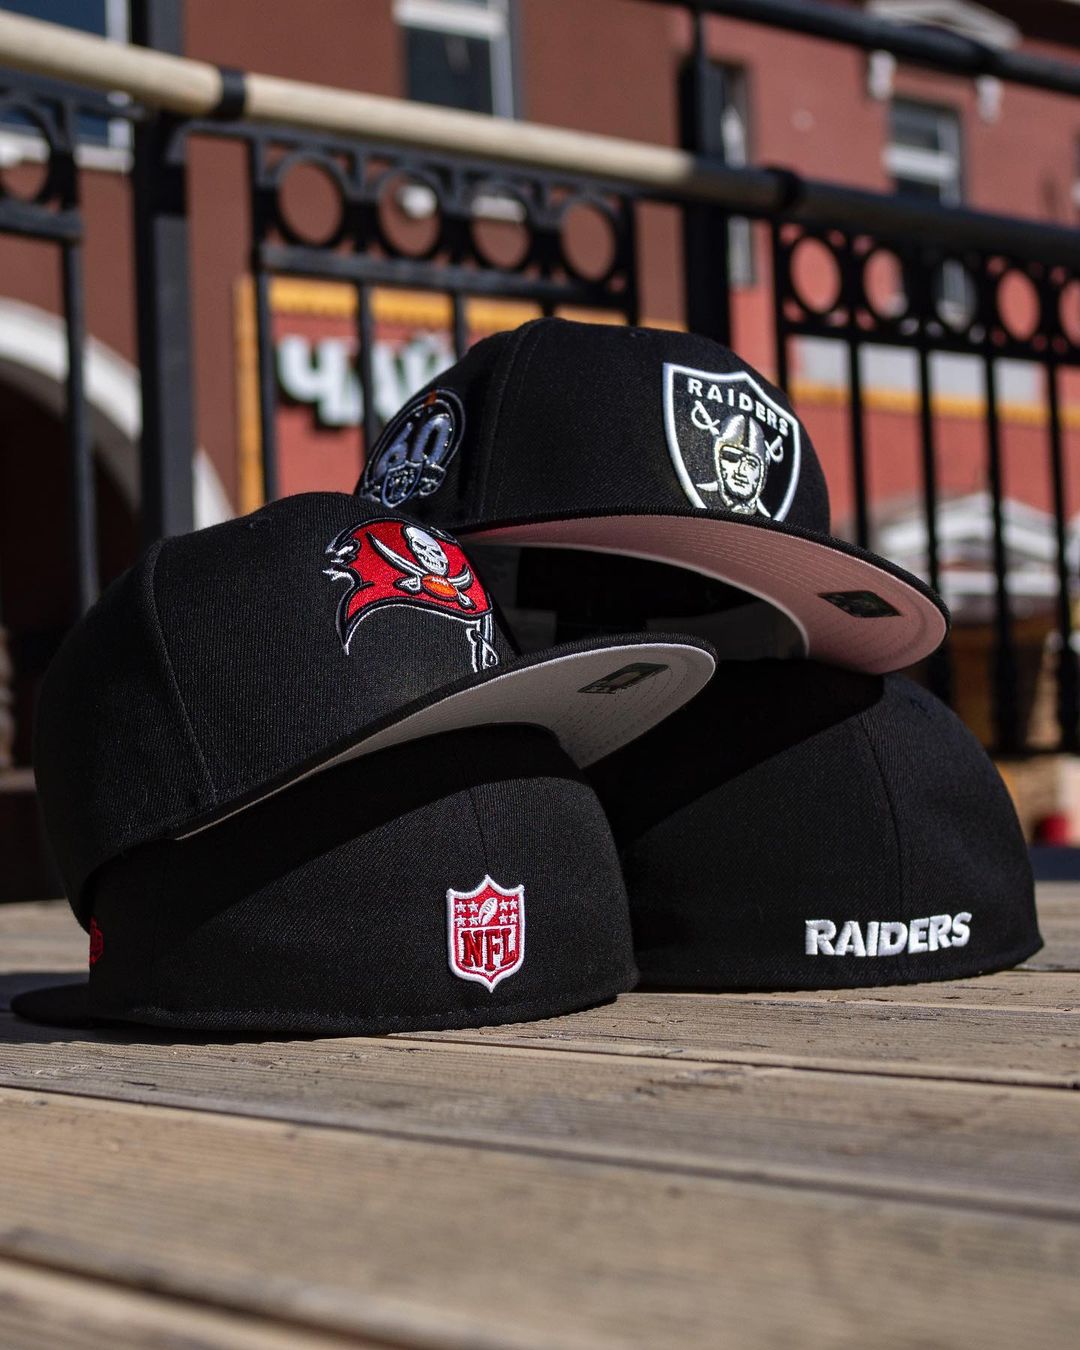 Raiders x Buccaneers Fitted Hats